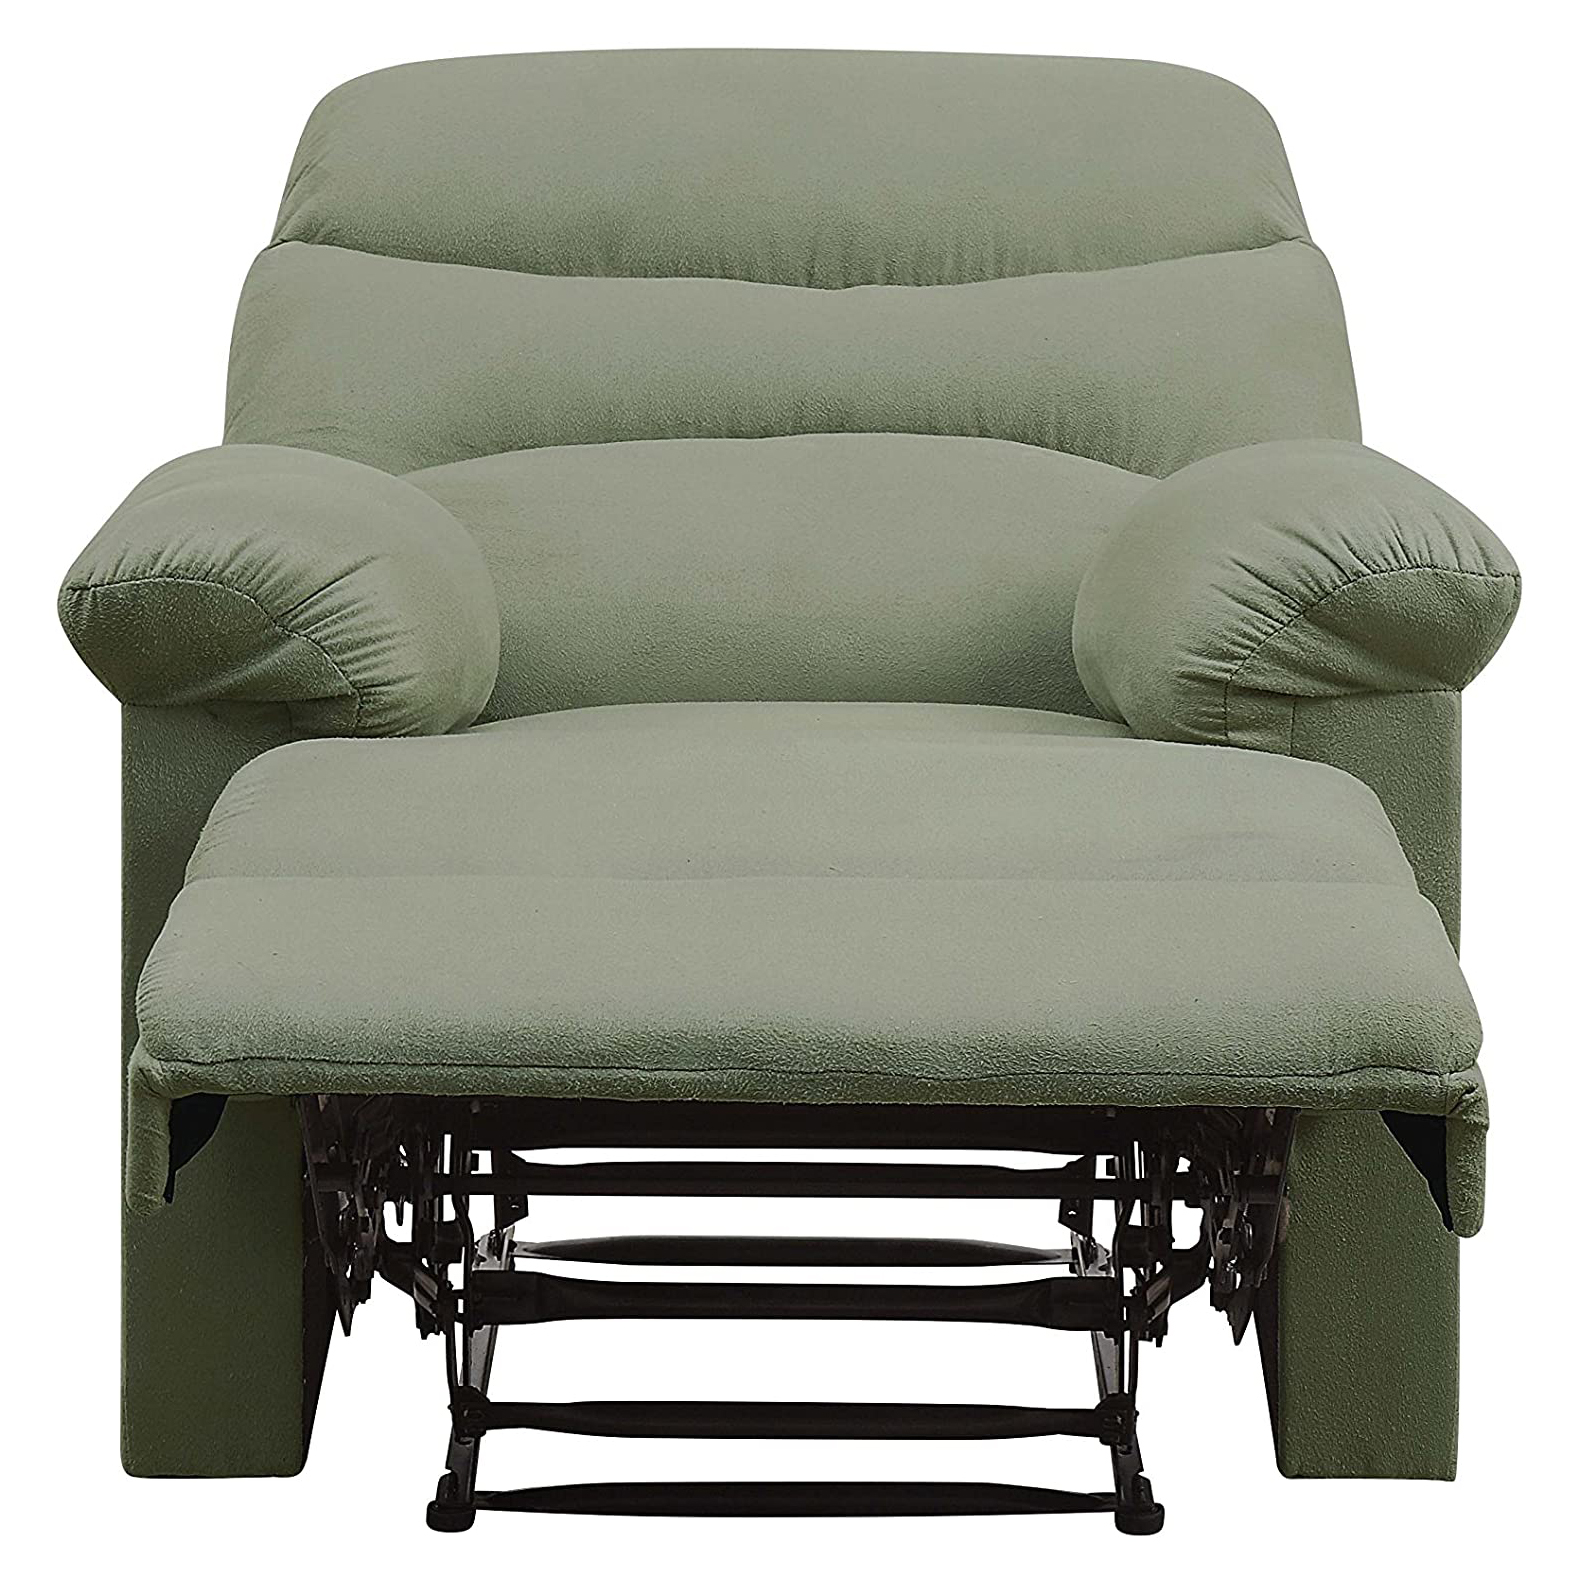 ACME Arcadia Smooth Microfiber Recliner Chair with External Handle, Sage Green - image 4 of 6